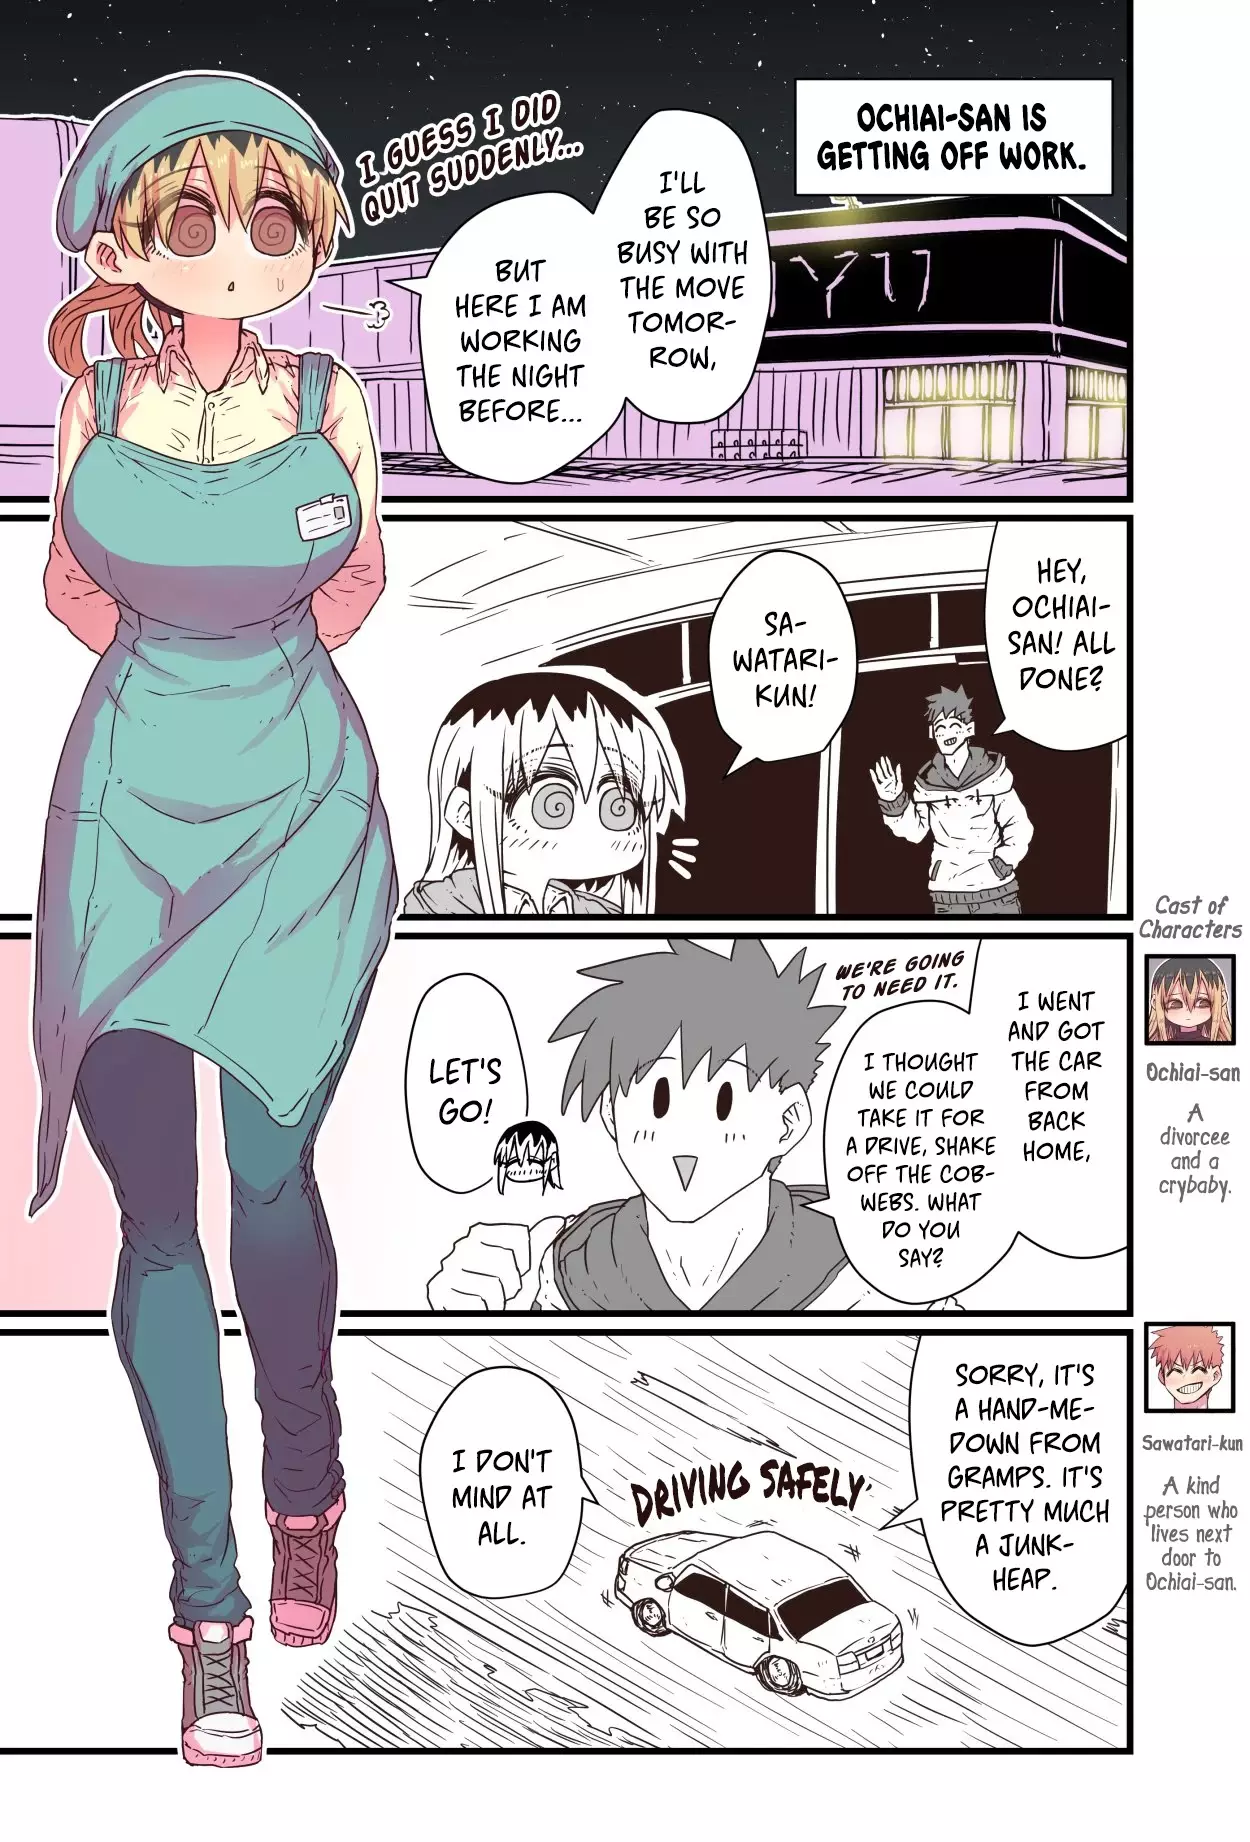 My Divorced Crybaby Neighbour - 25 page 1-a3b7f13f